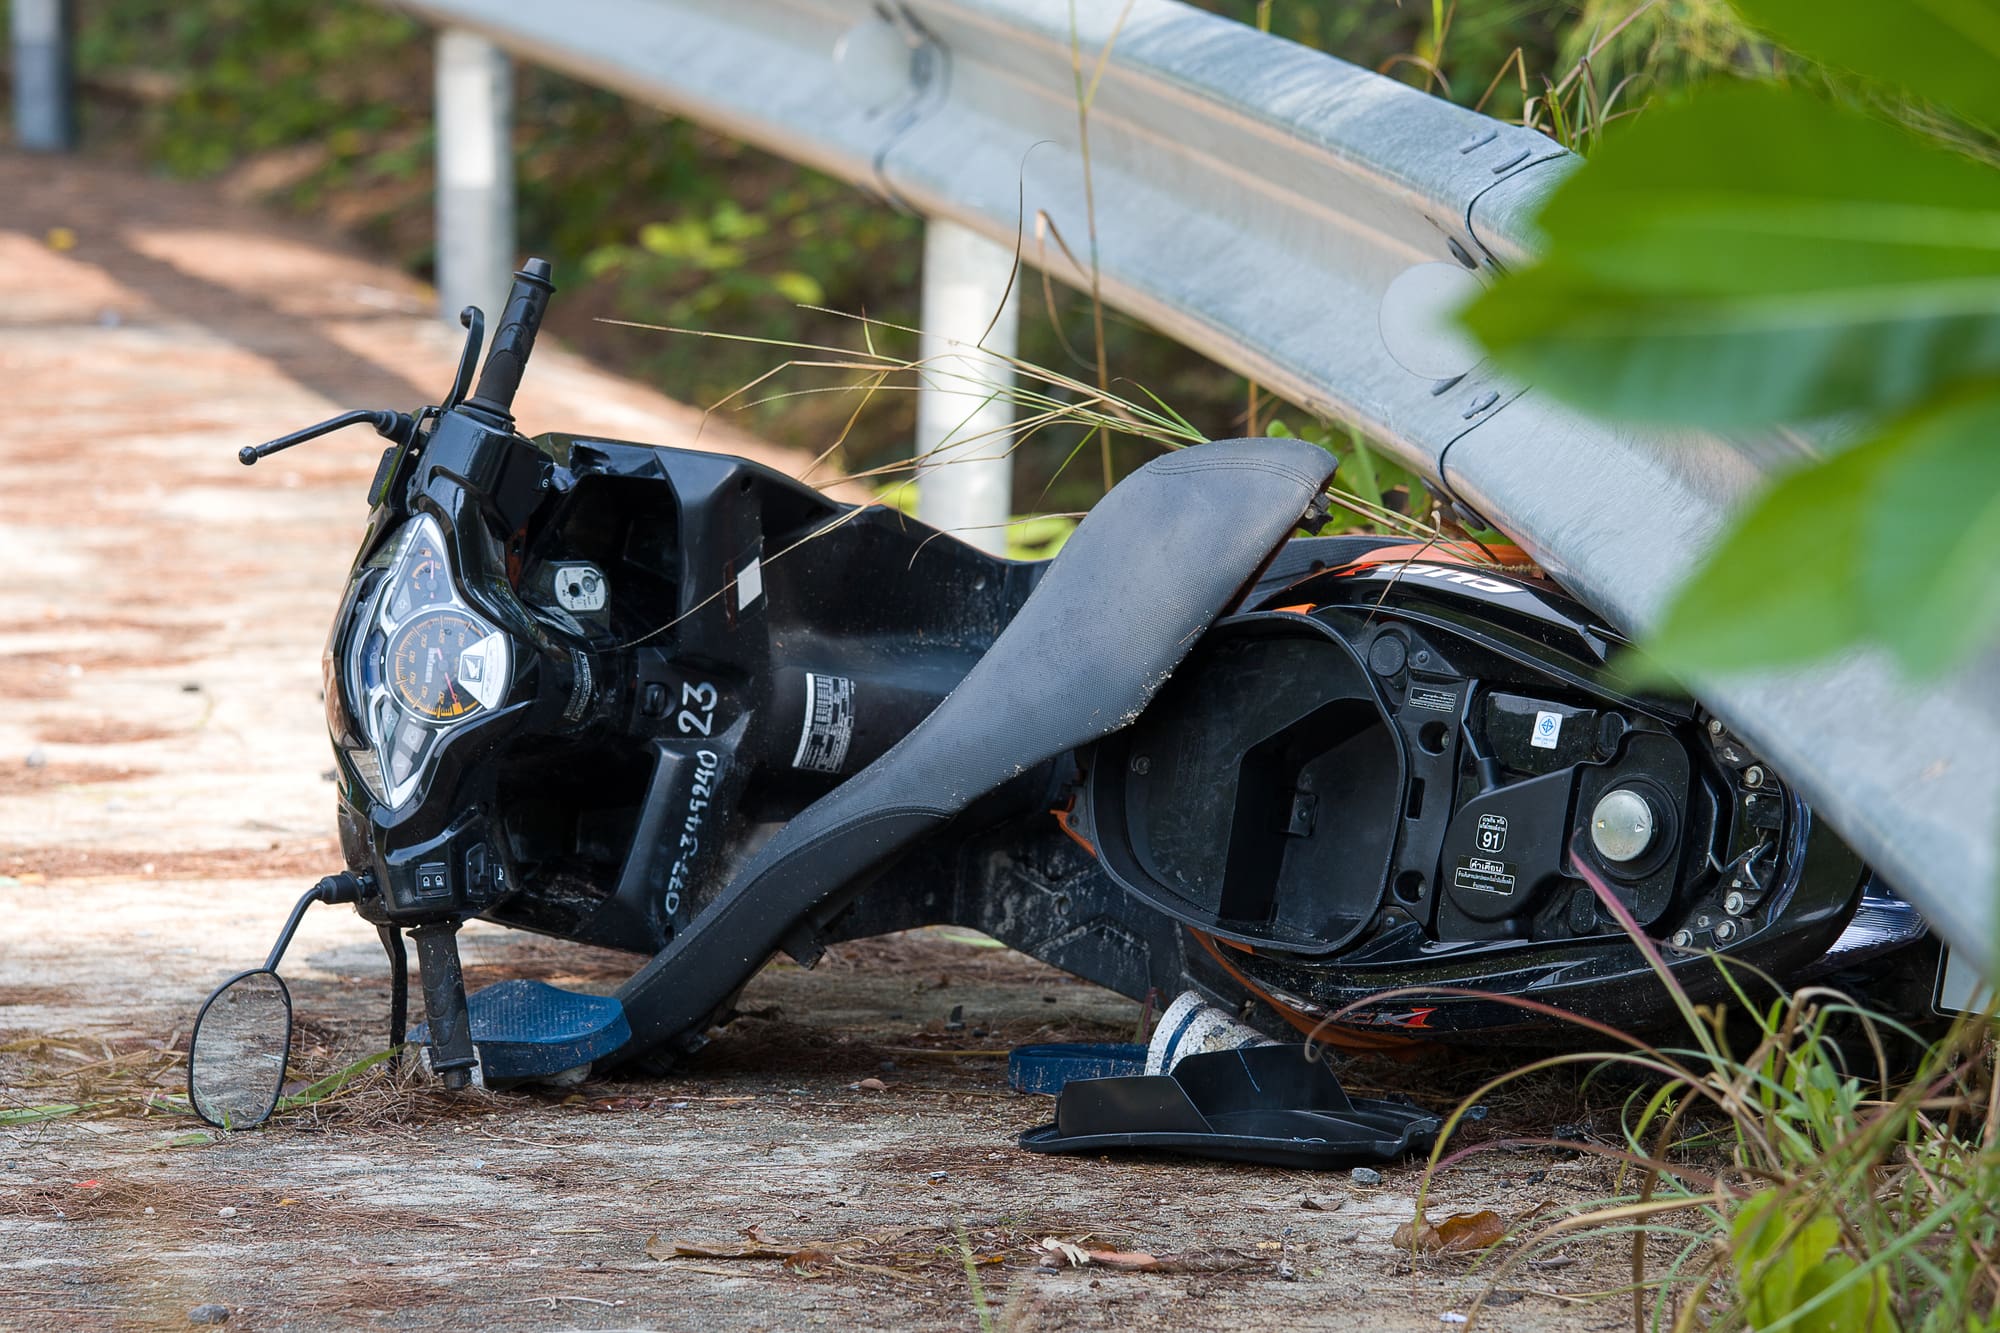 A wrecked motorcycle laid on its side under a roadside guard rail.